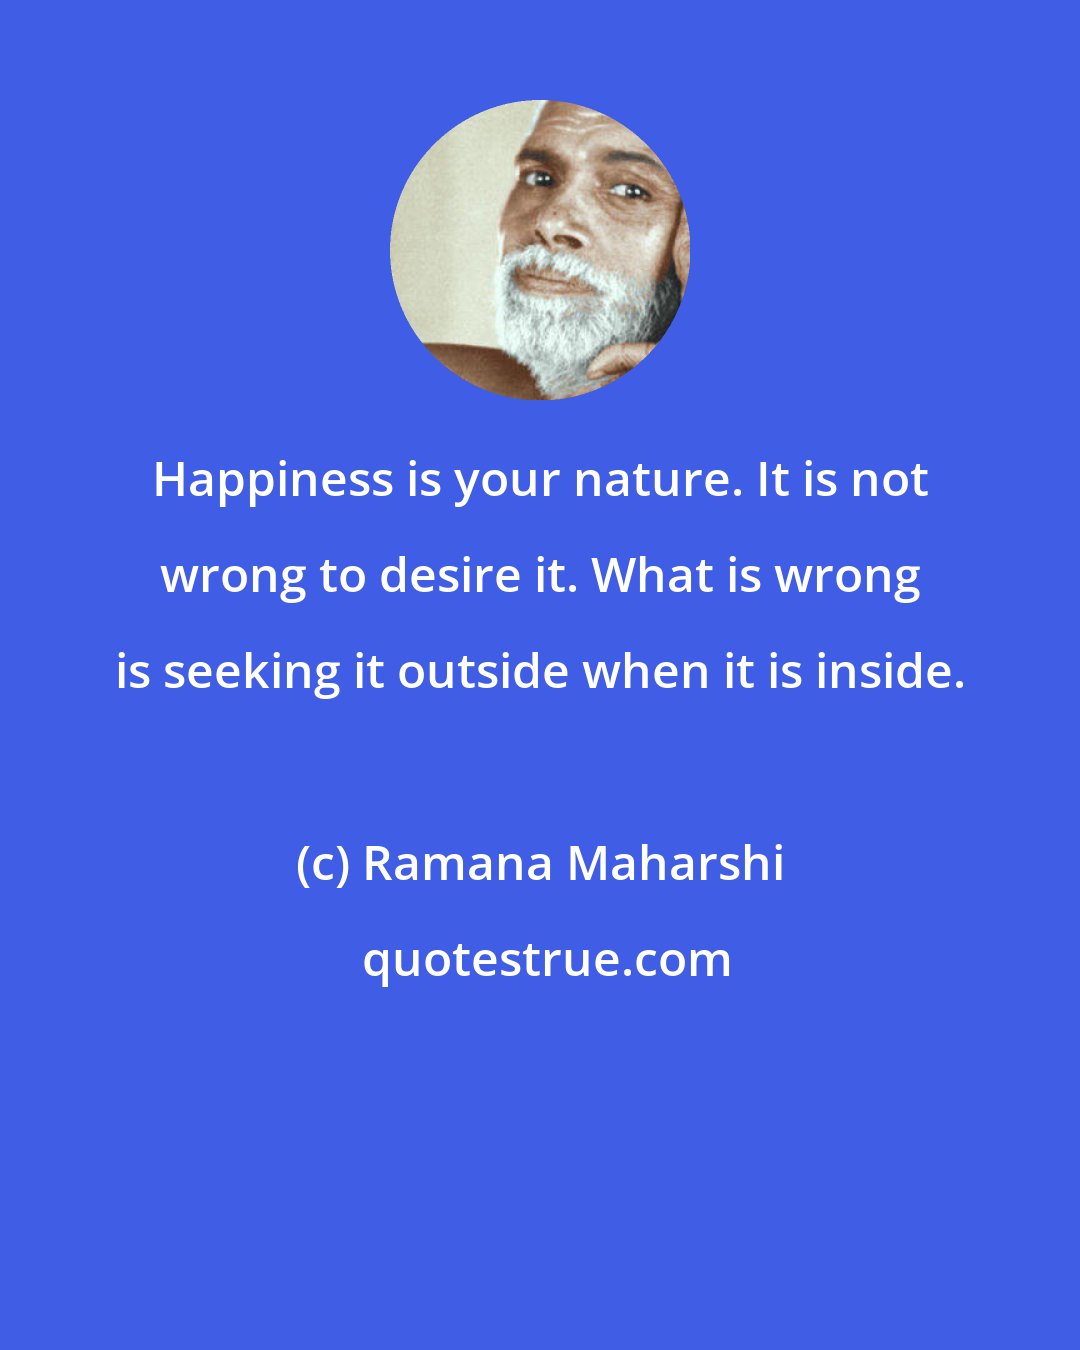 Ramana Maharshi: Happiness is your nature. It is not wrong to desire it. What is wrong is seeking it outside when it is inside.